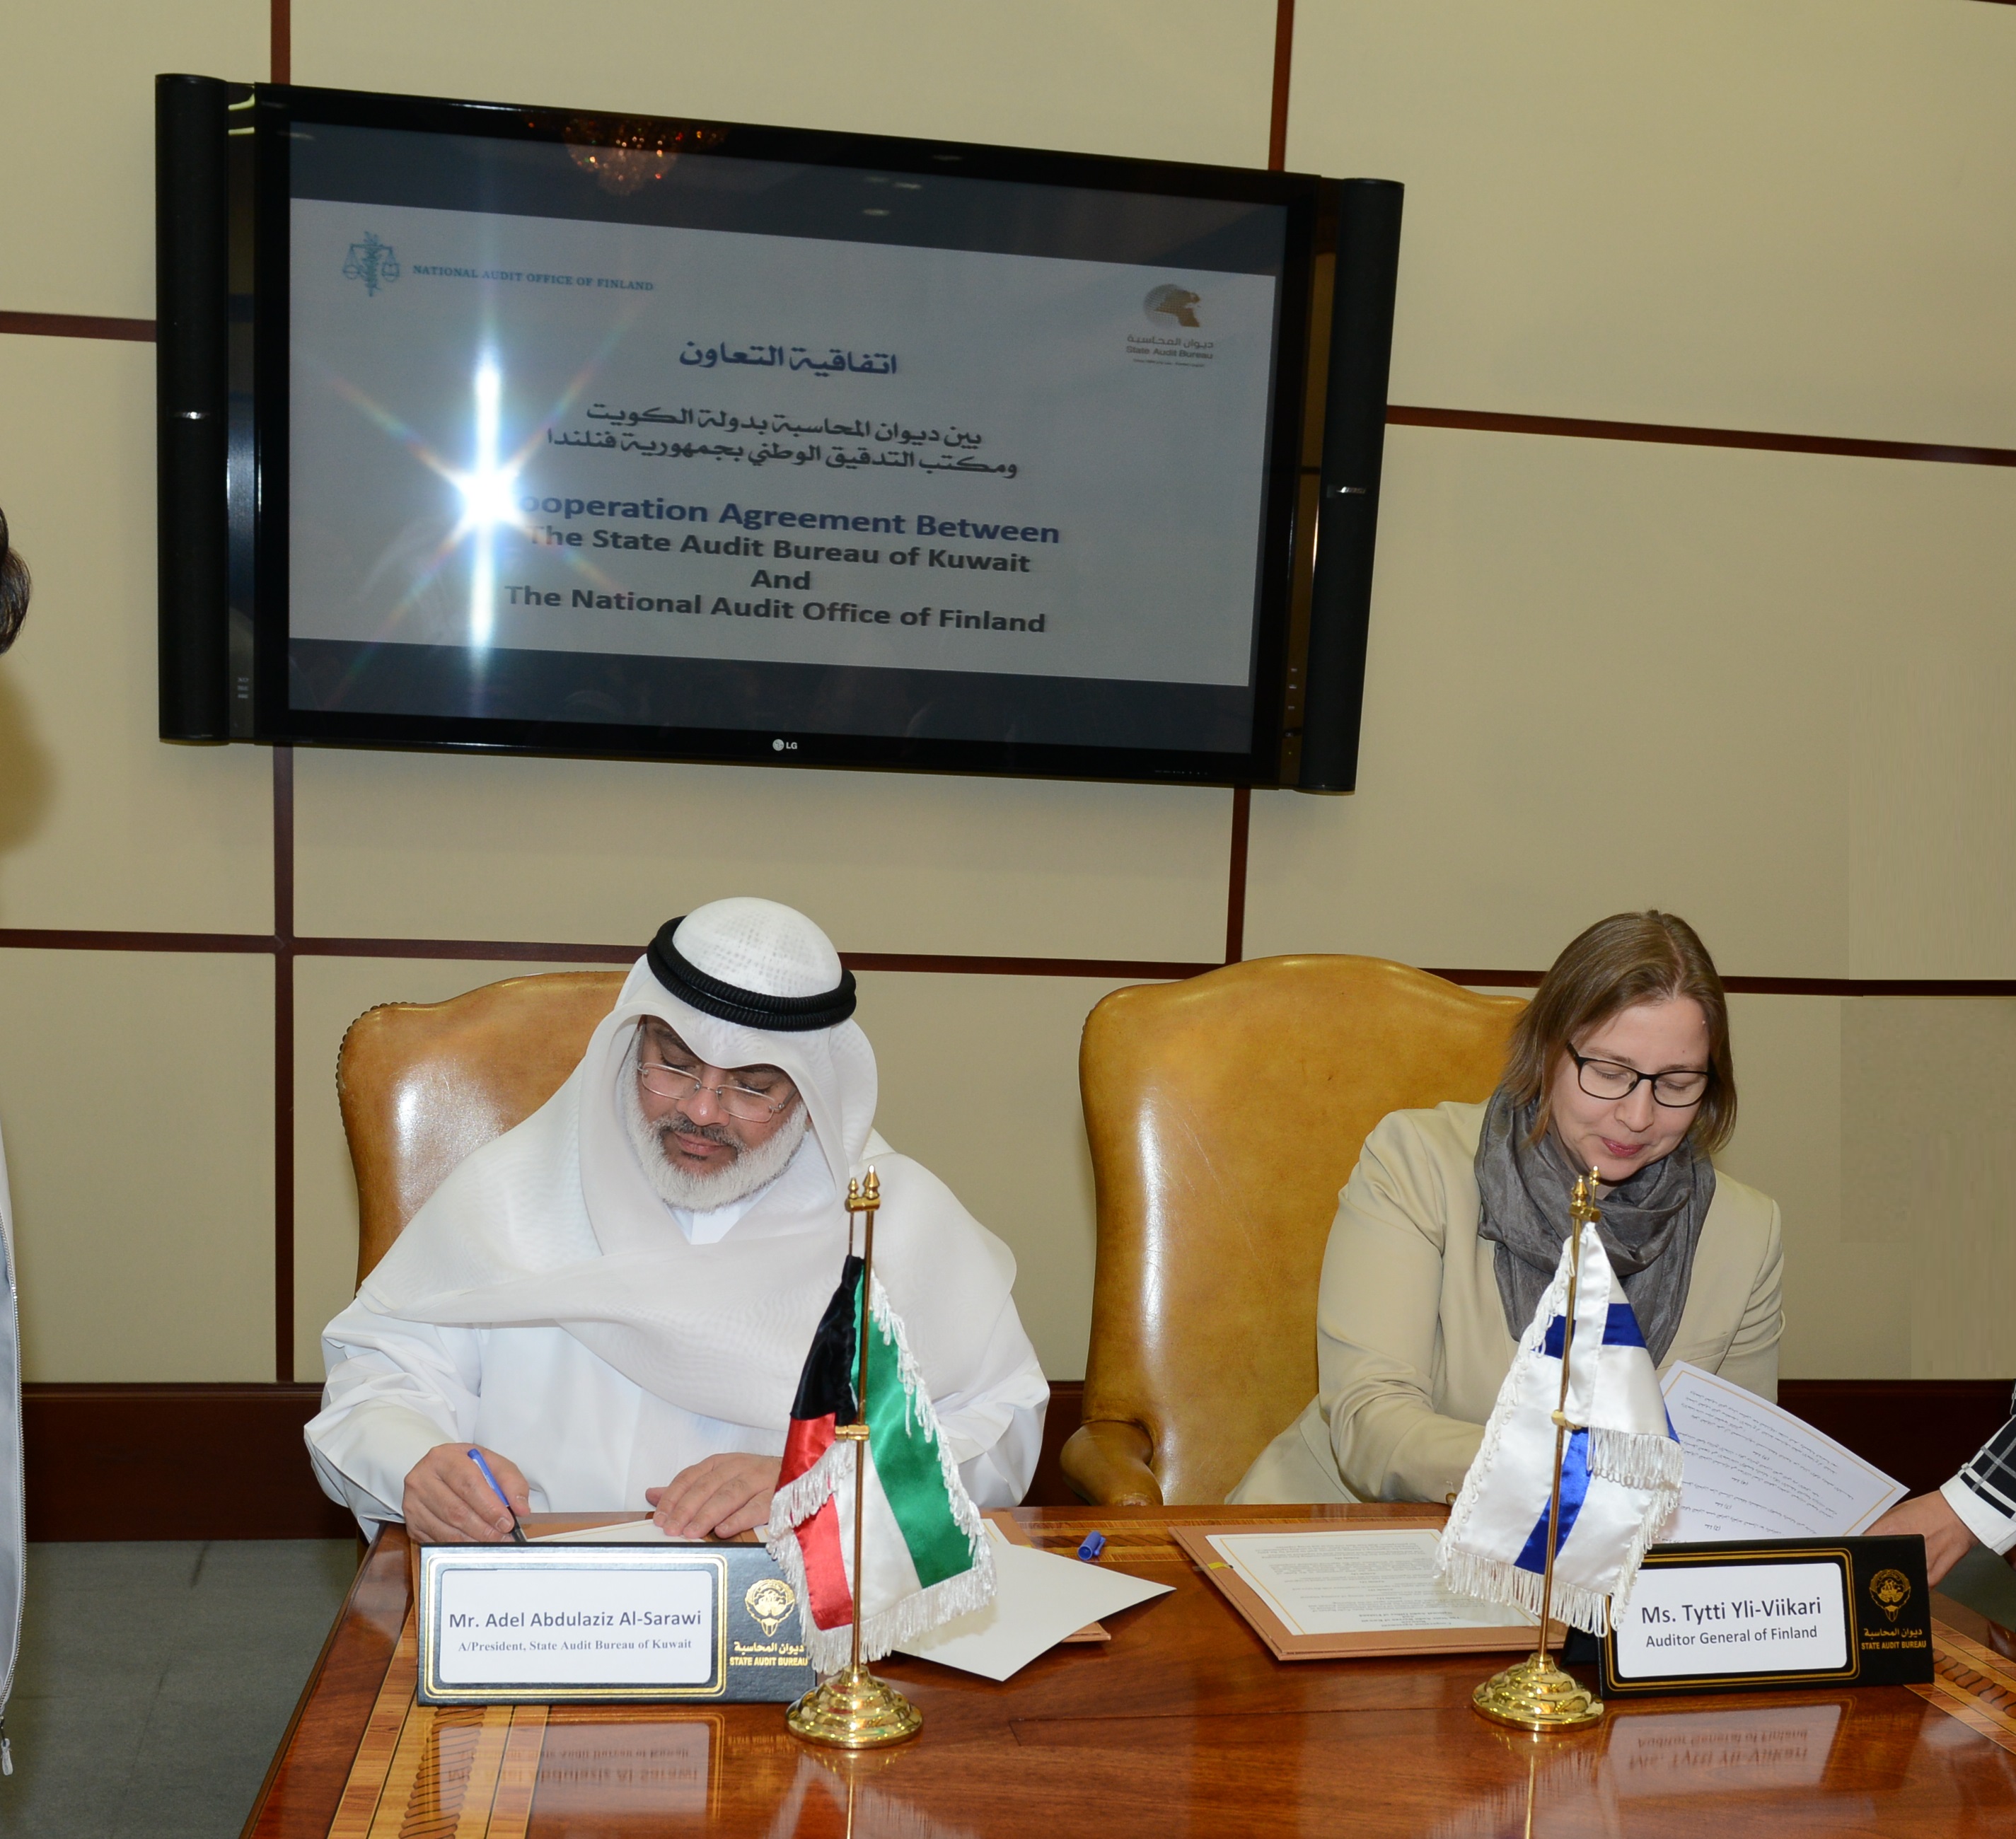 Kuwait's State Audit Bureau (SAB) and National Audit Office of Finland (NAO) signed a cooperative agreement